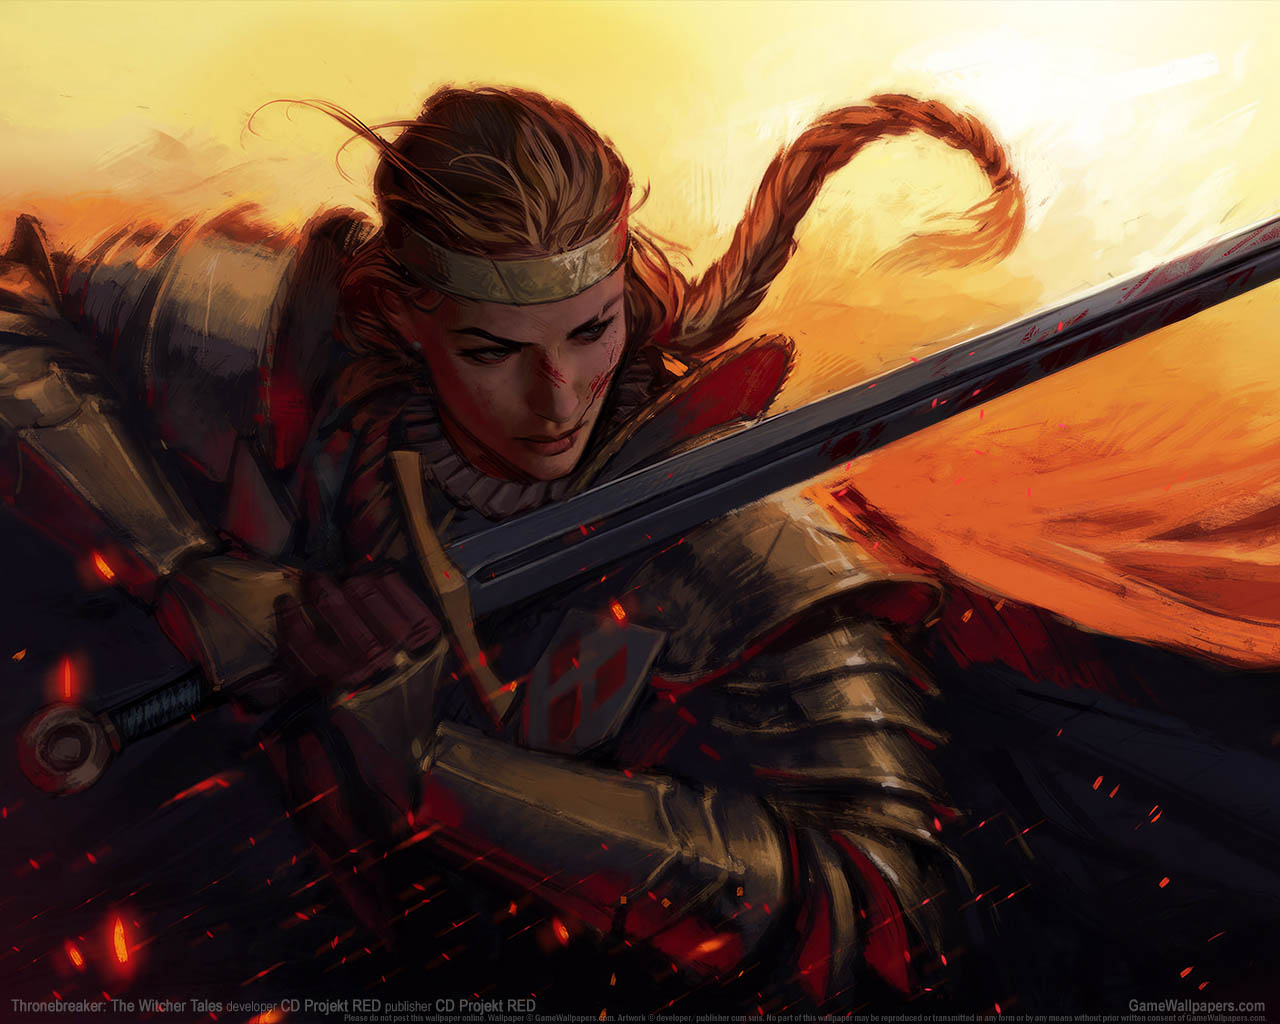 Thronebreaker%3A The Witcher Tales wallpaper 02 1280x1024